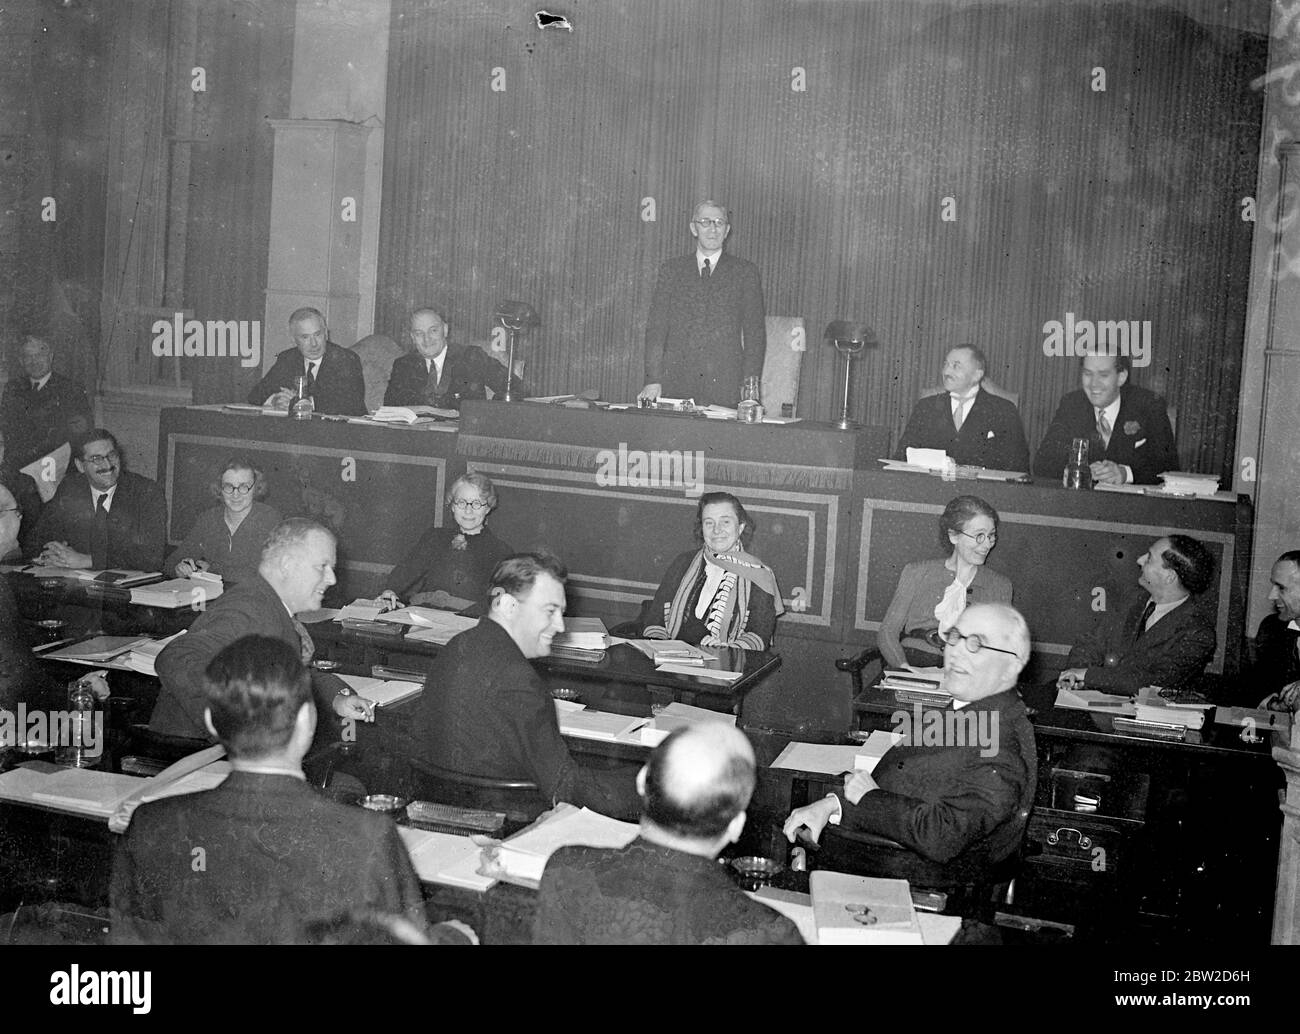 The governing body of the International Labour Office is meeting for the first time in London to hold its 85th session at Burlington House, Piccadilly. The body consists of three groups comprising representatives of 15 governments and eight representative each of employers and workers organisation. The British Minister of Labour, Mr Ernest Brown, attended. Photo shows: The opening meeting under the chairmanship of Mr F W Leggatt, Chief of the Industrial Relations Department of the Ministry of Labour. Left is Sir Thomas Phillips, Permanent Secretary at the Ministry Of Labour. On the right are M Stock Photo